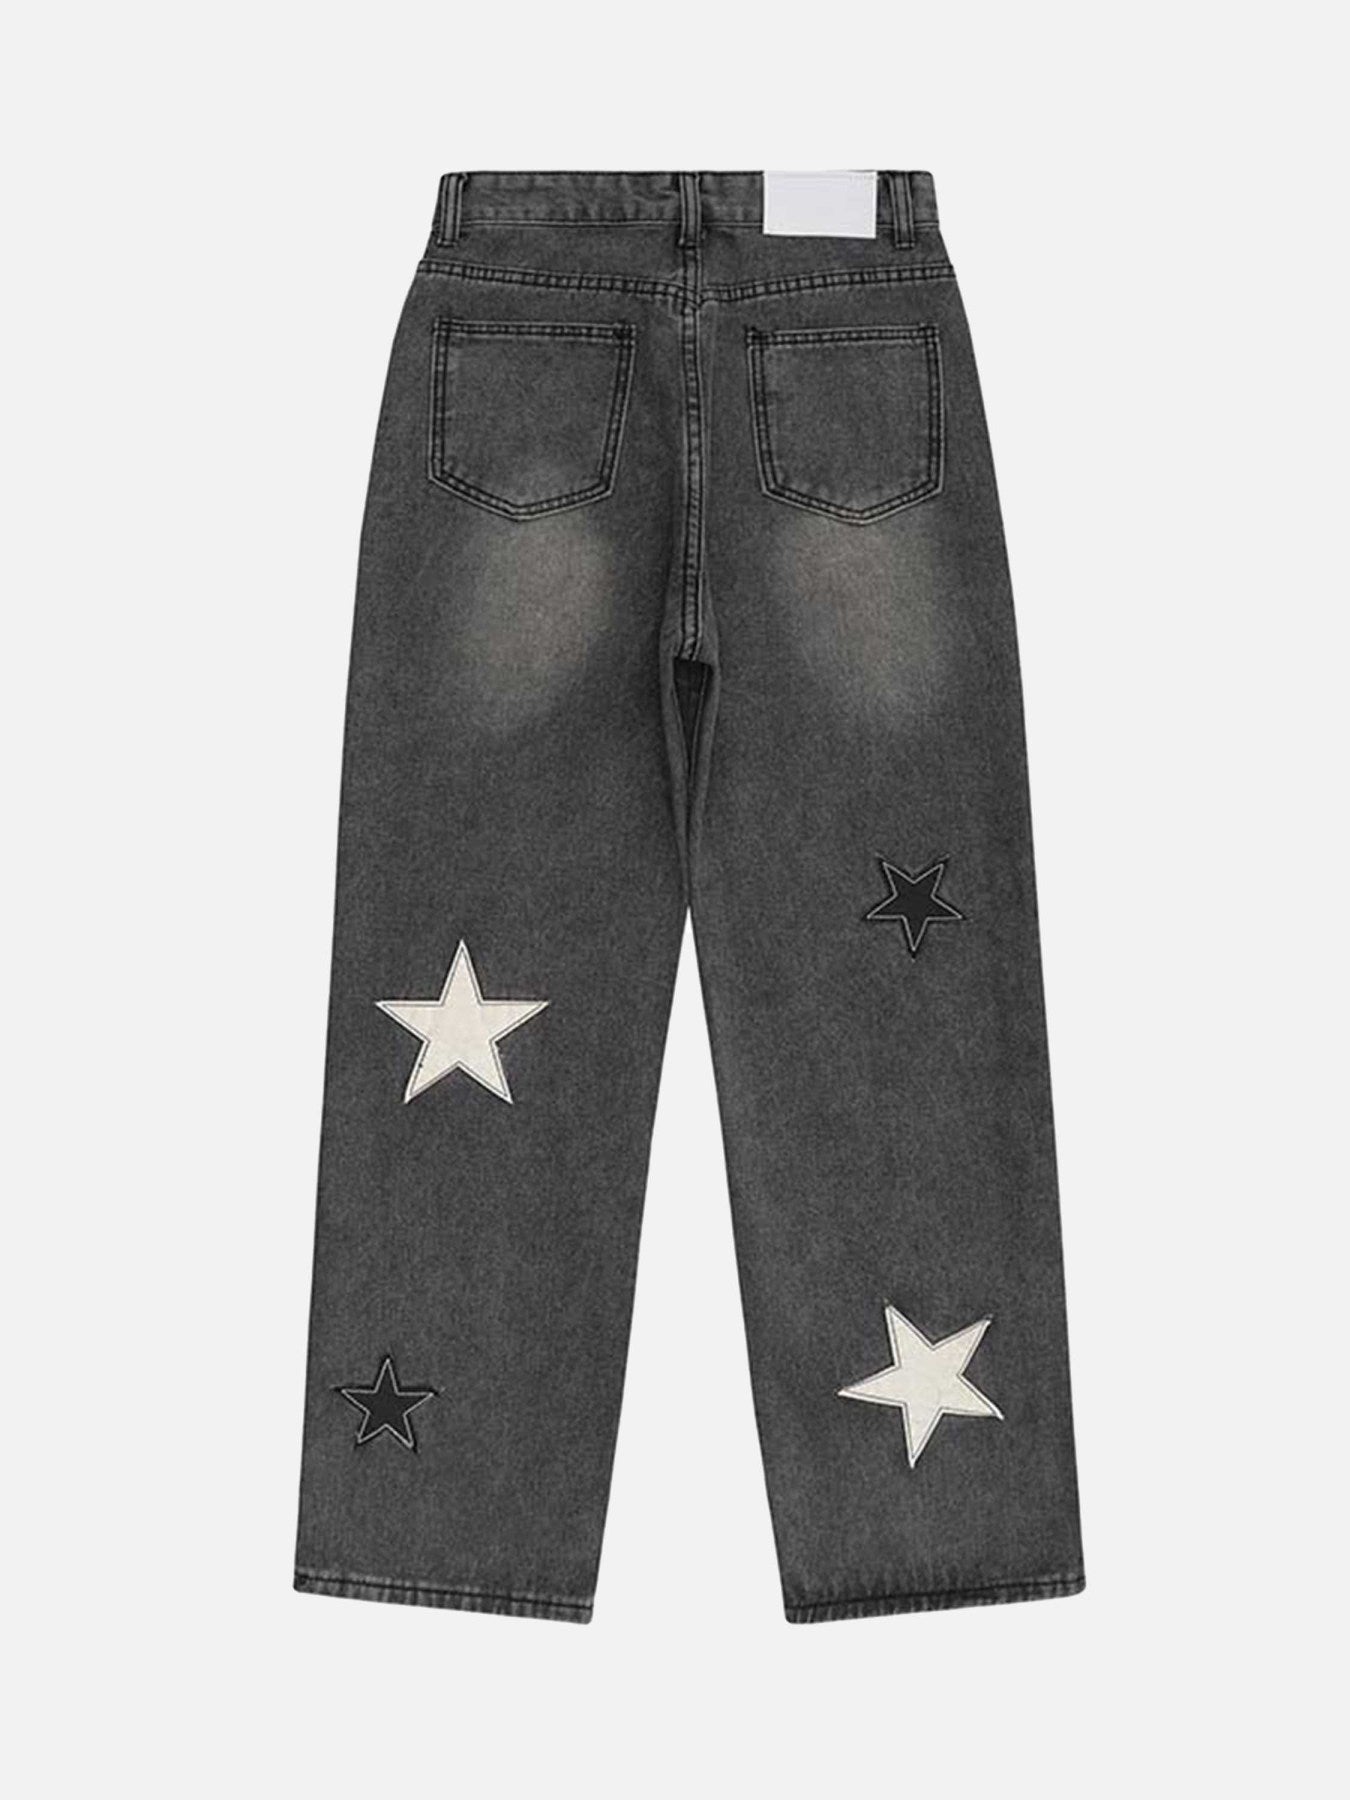 The Supermade Star Patch Embroidery Jeans